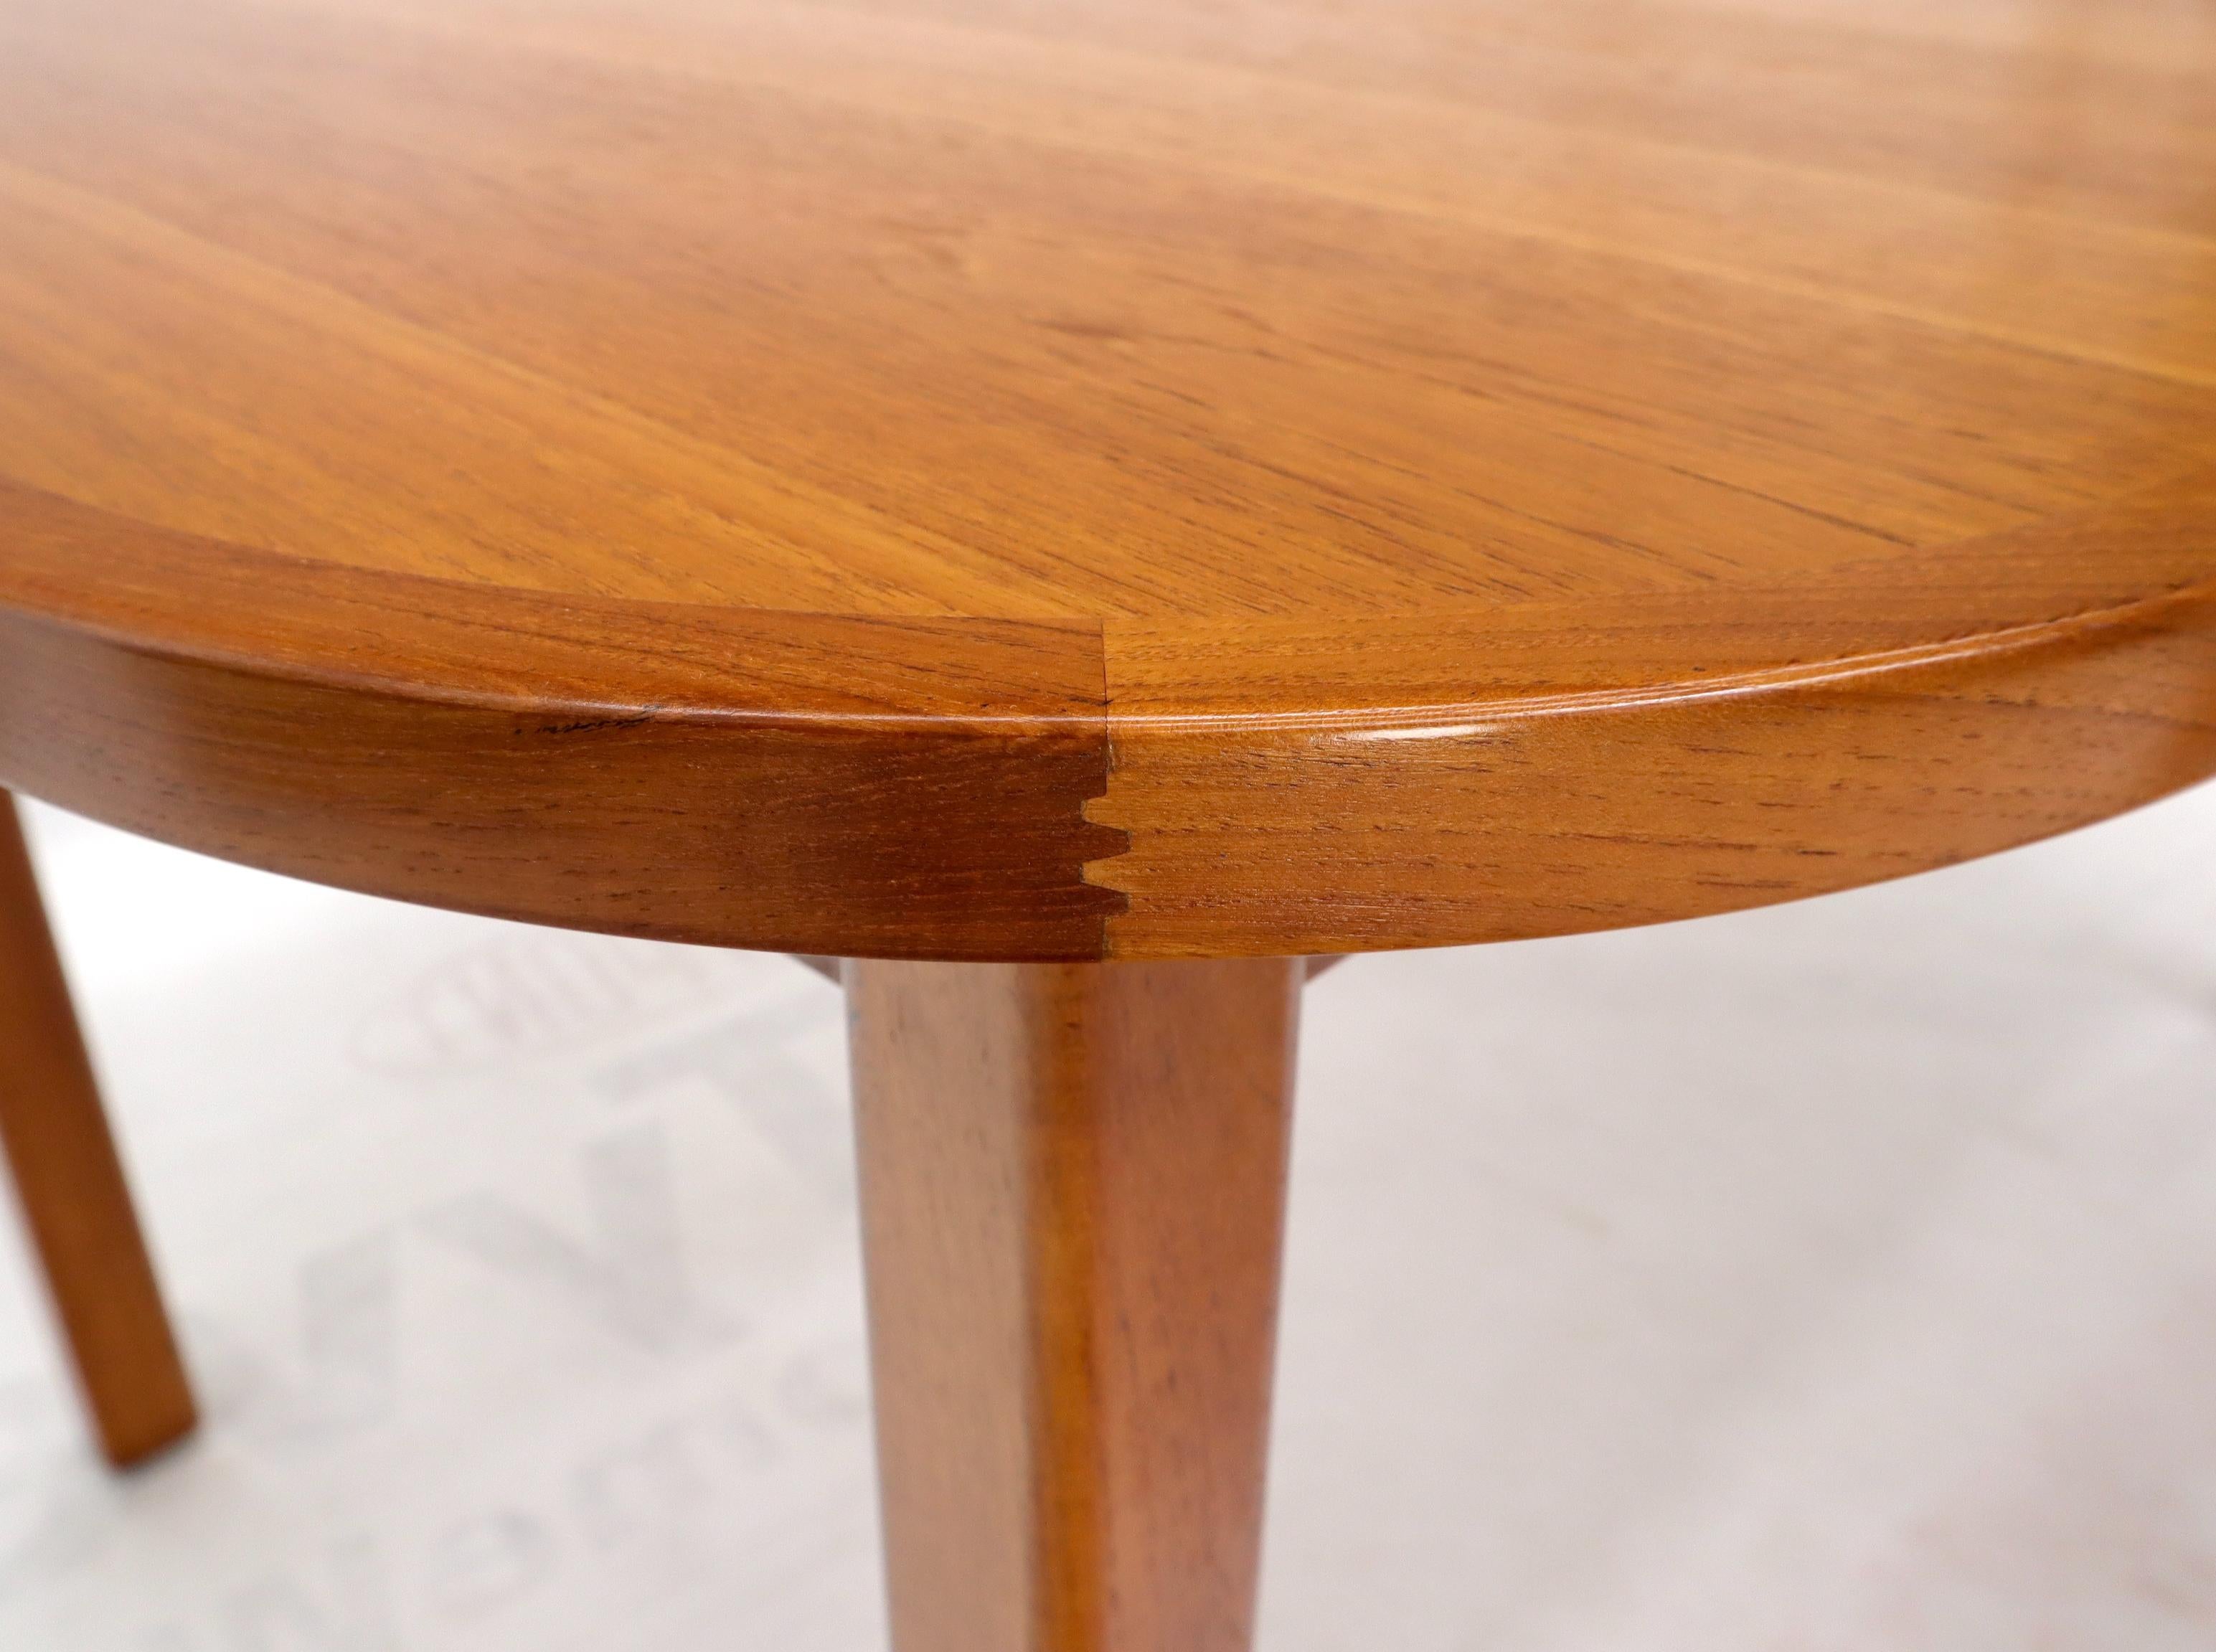 Rectangle Round Corners Teak Midcentury Danish Modern Dining Table Pop Up Leaf In Good Condition For Sale In Rockaway, NJ